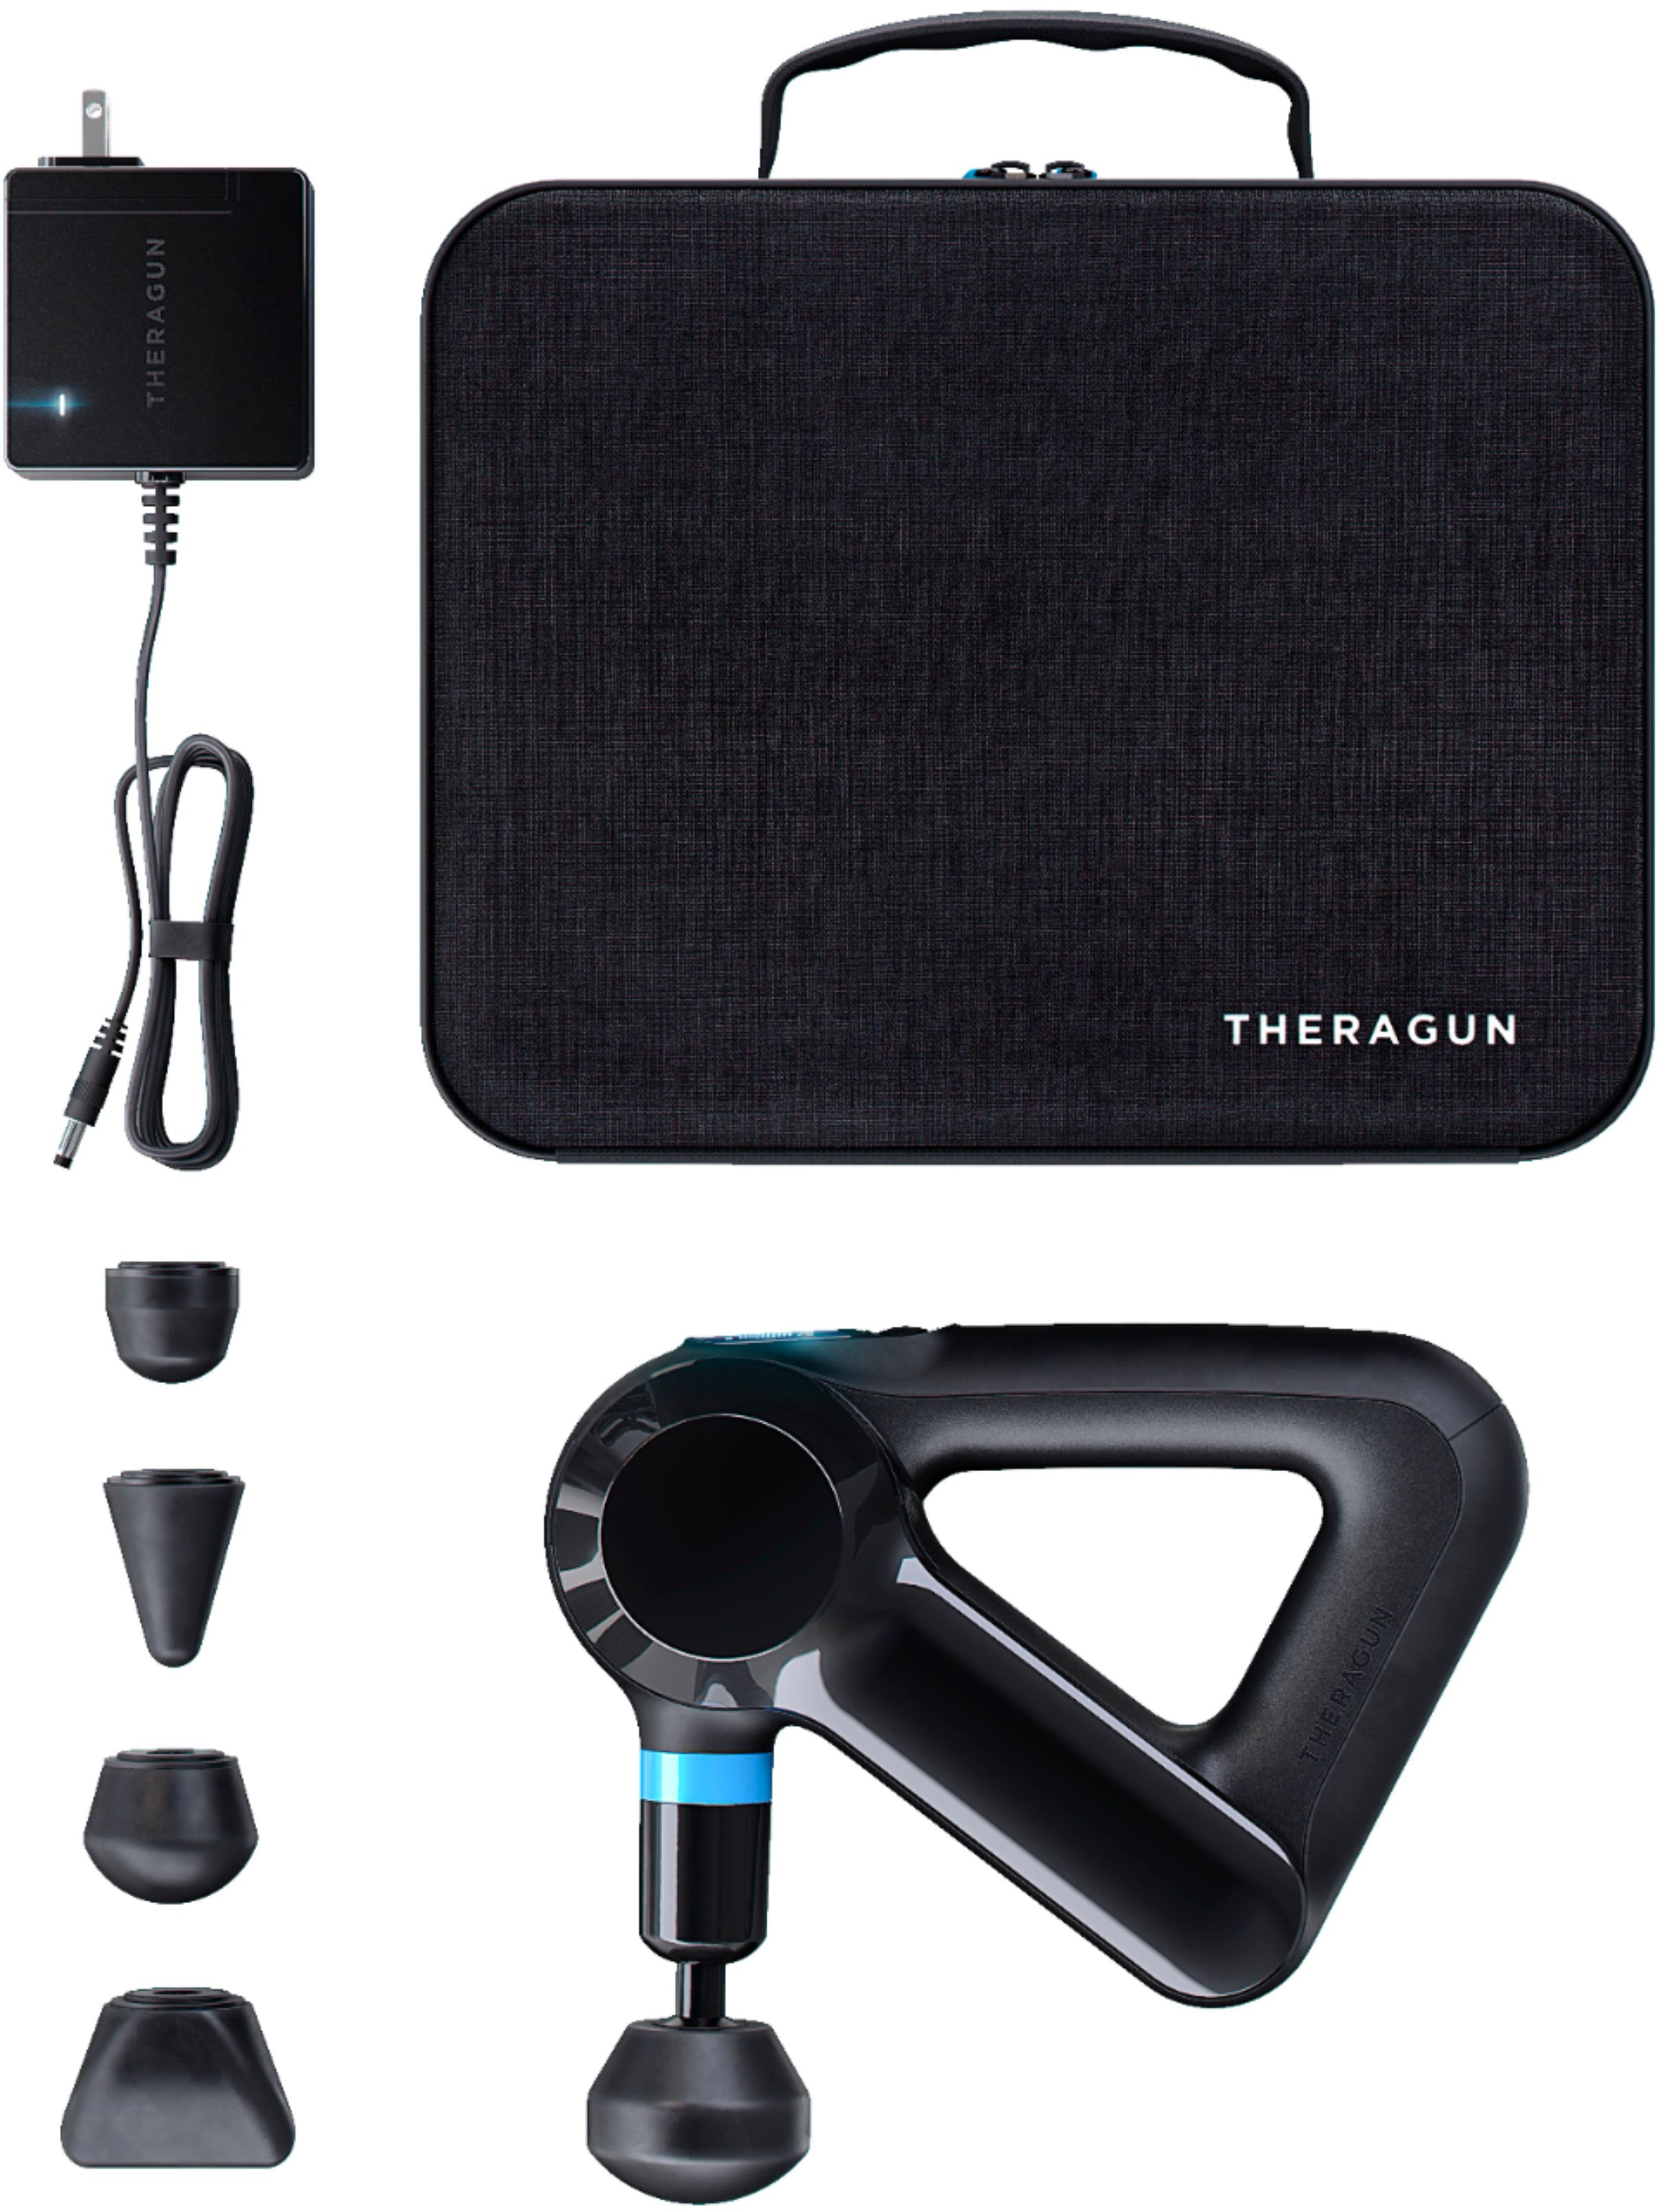 Left View: Therabody - Theragun Elite Bluetooth + App Enabled Massage Gun + 5 Attachments, 40lbs Force (Latest Model) - Black